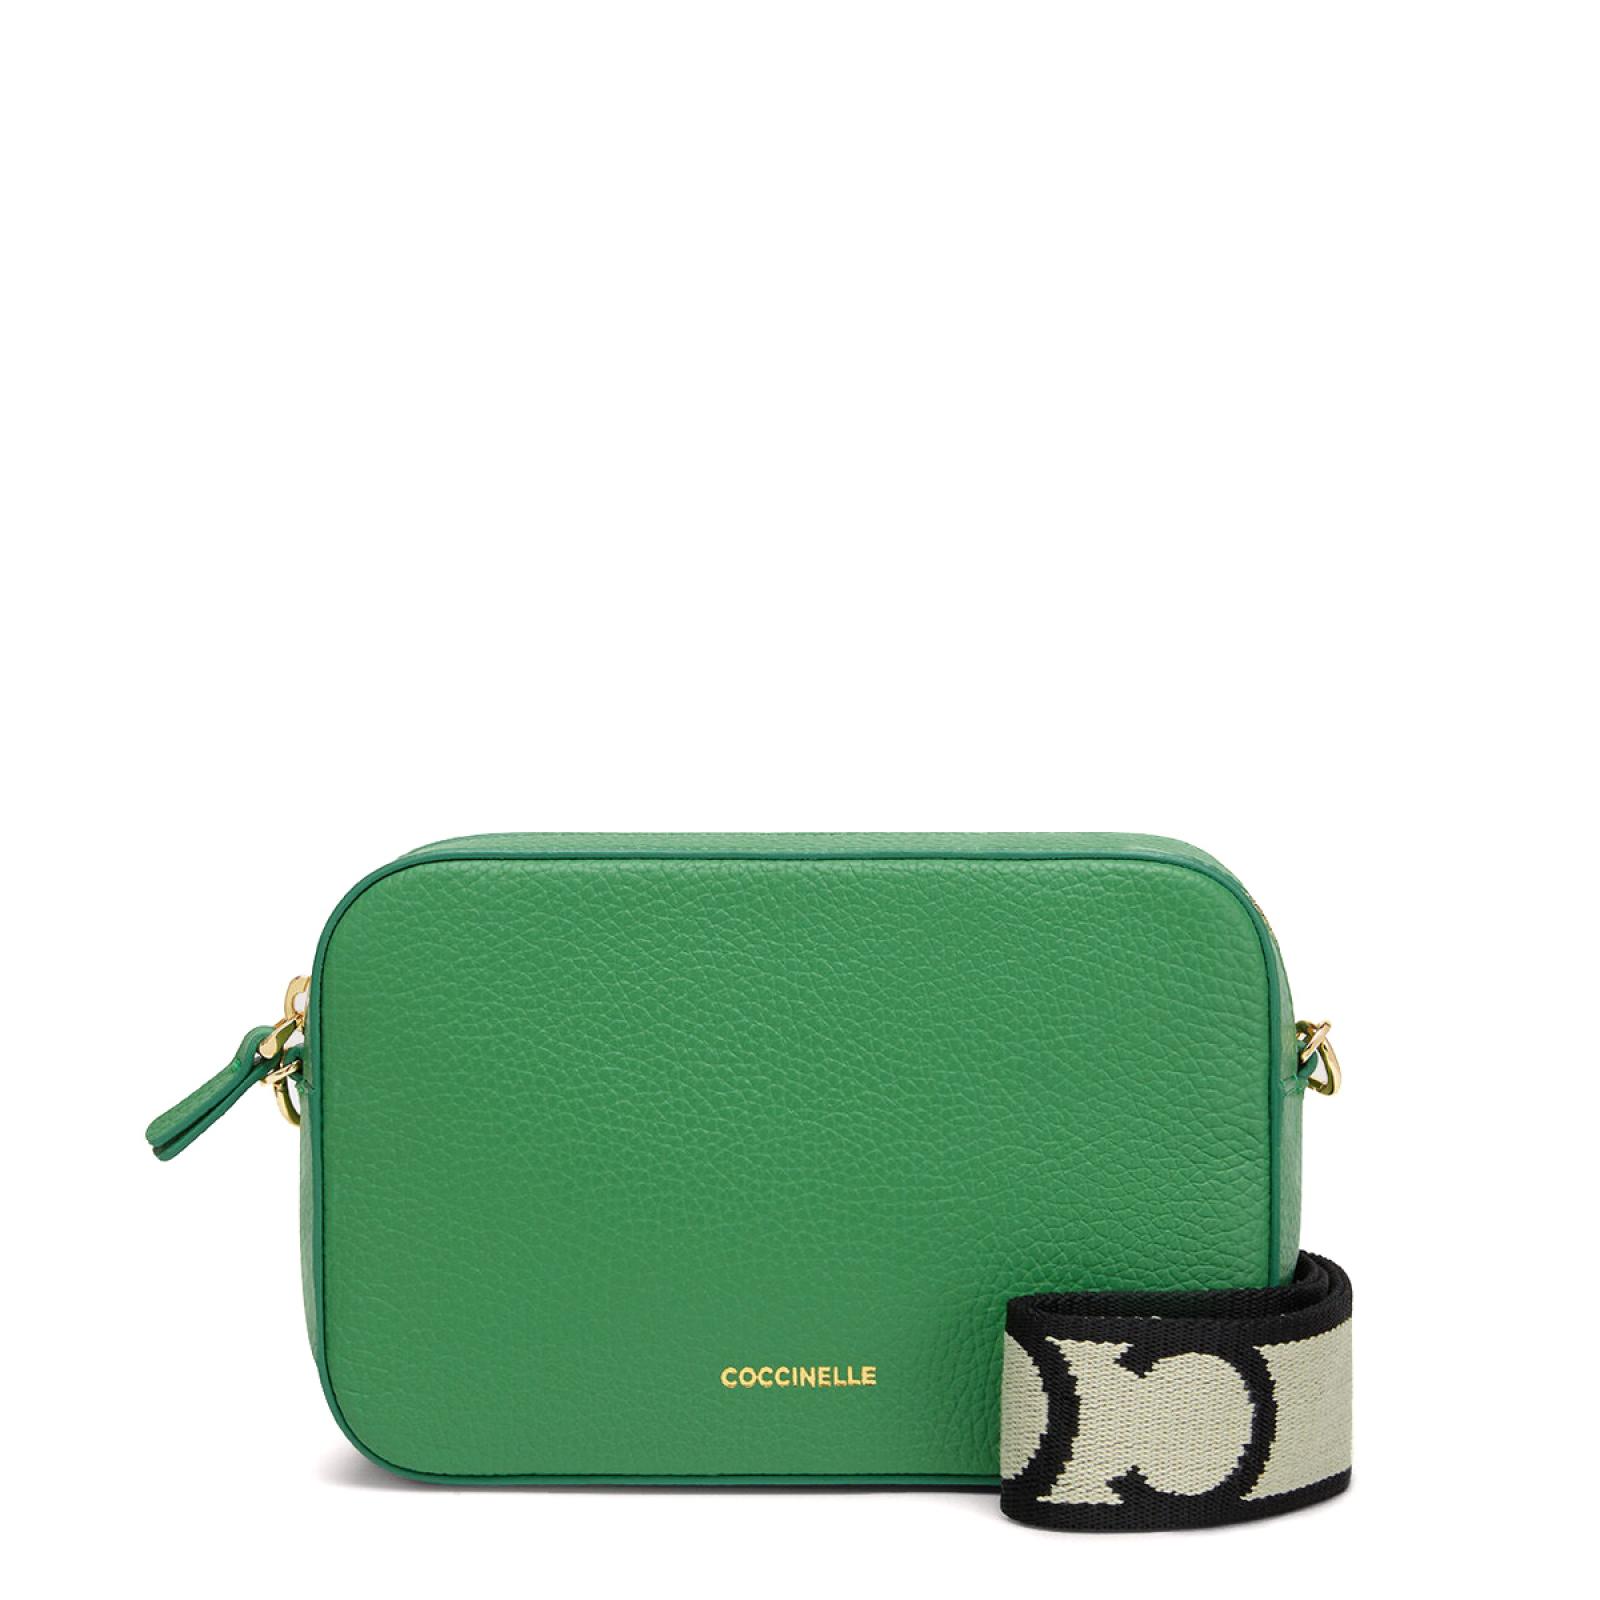 Coccinelle Minibag Tebe Peppermint - 1